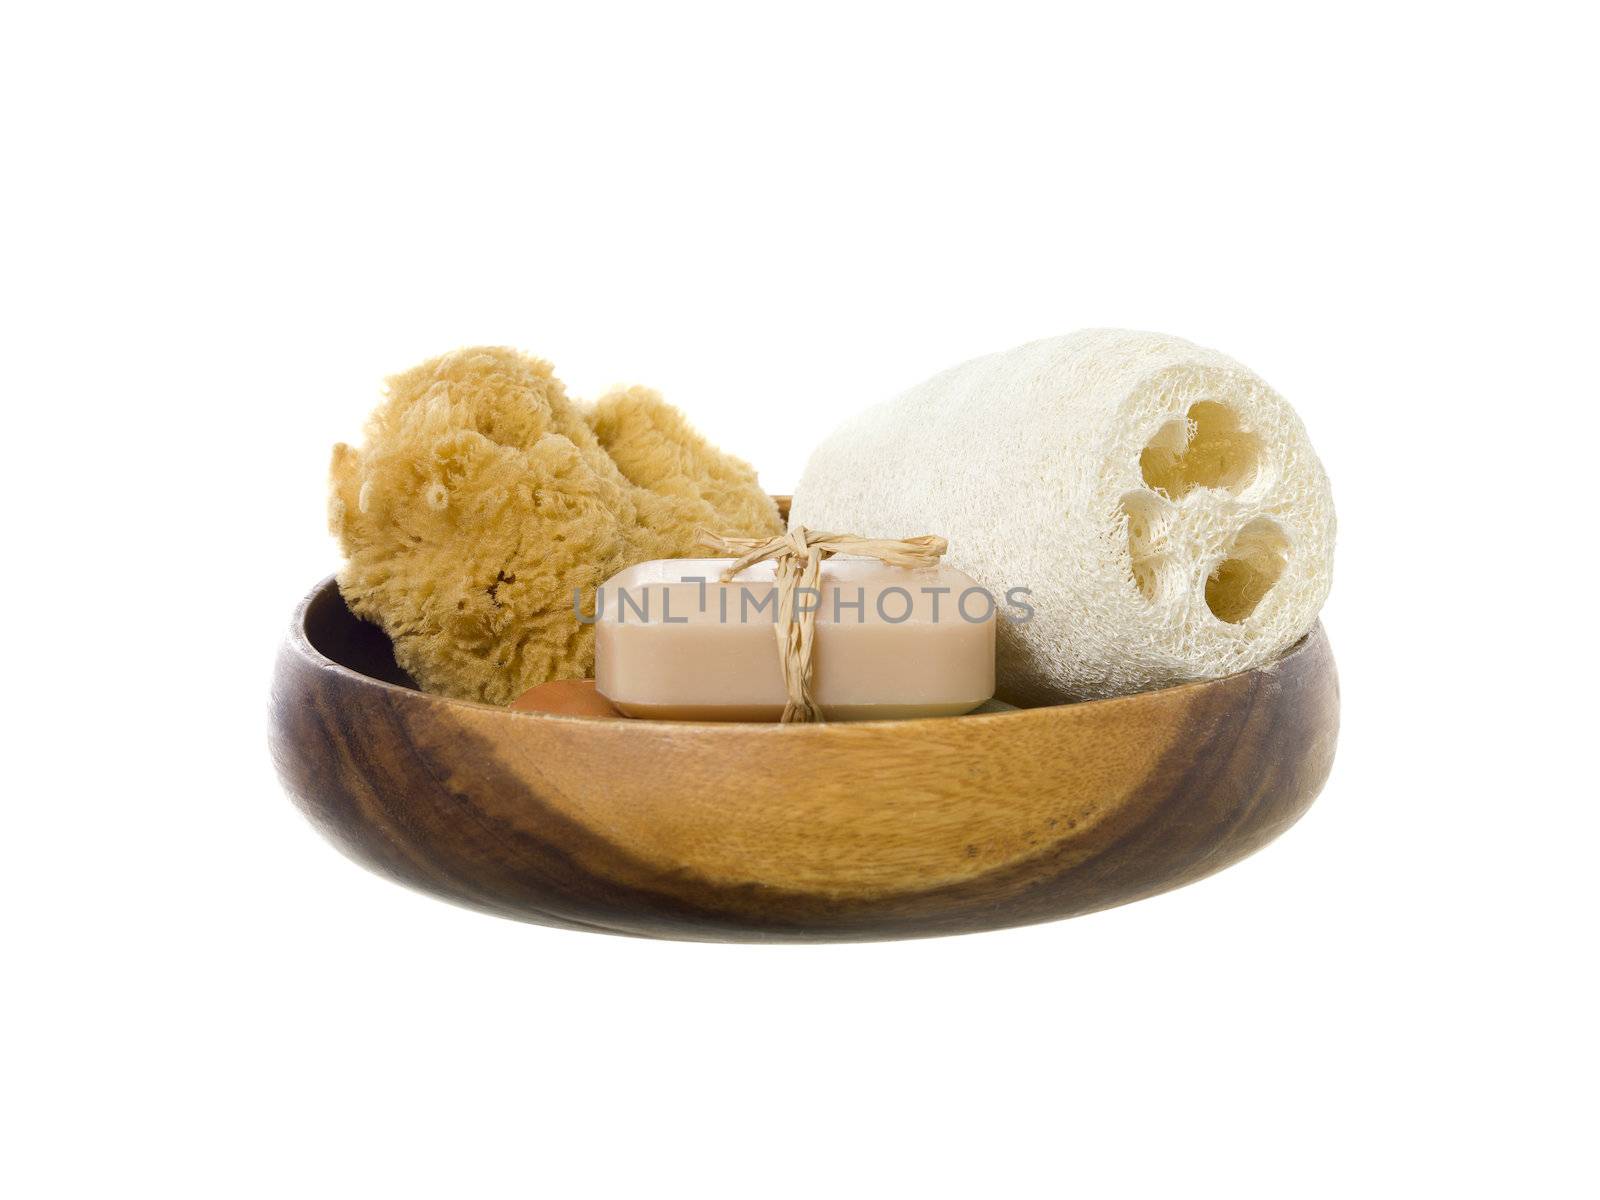  Spa products on a wooden dish against white background